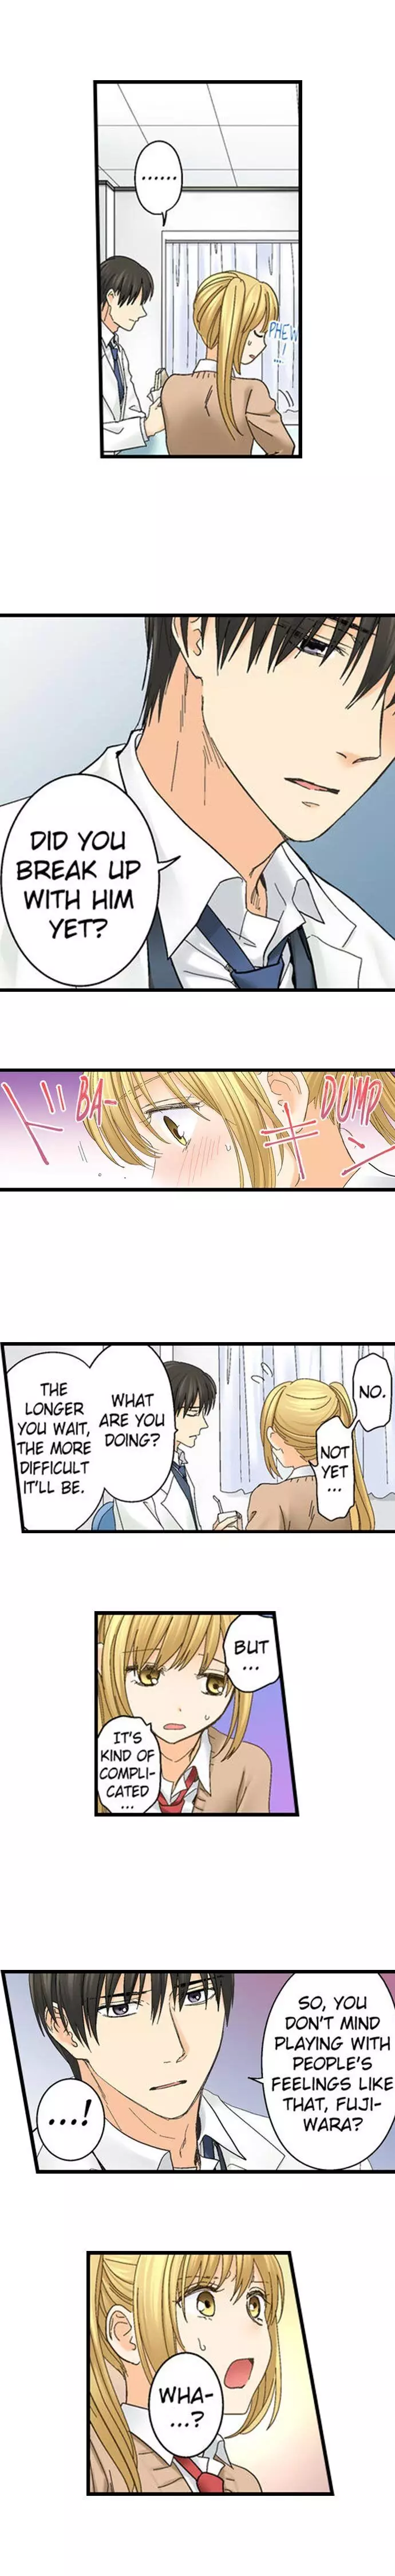 Running A Love Hotel With My Math Teacher - 60 page 6